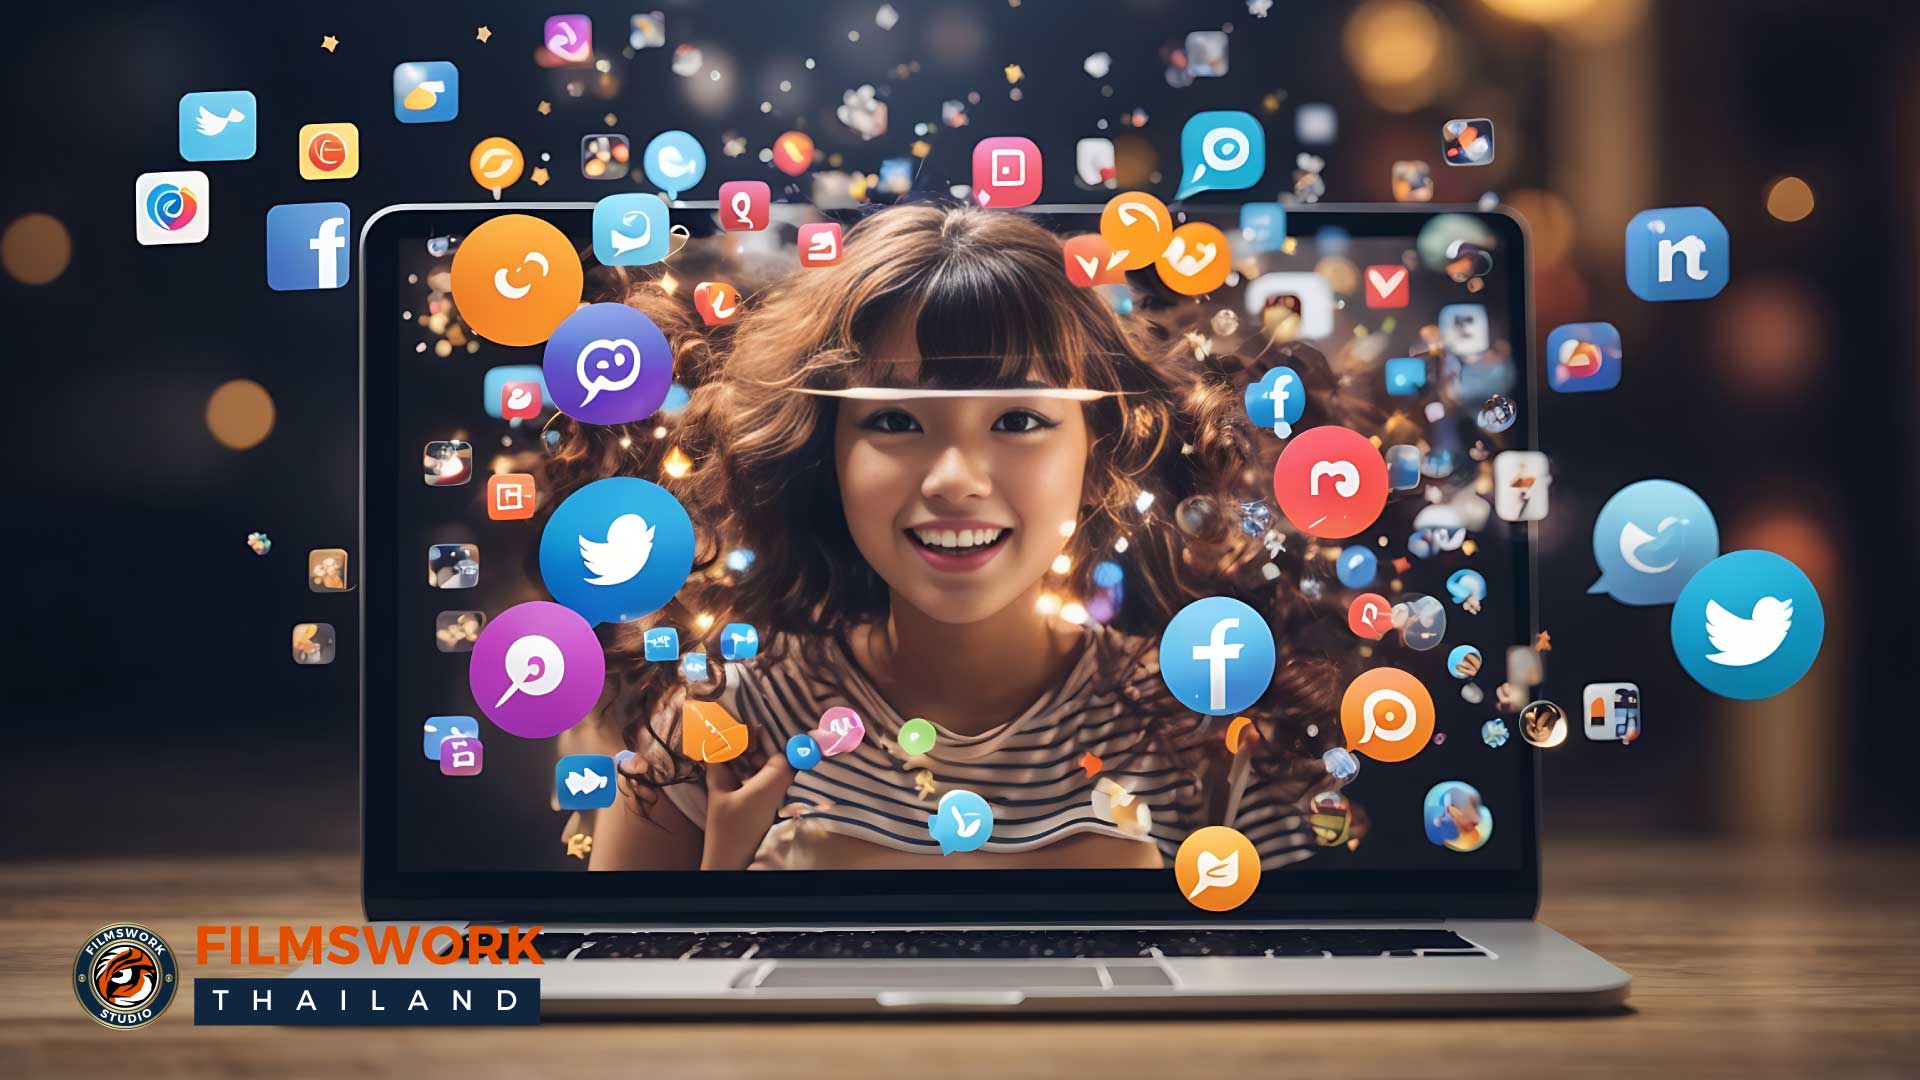 Beyond its role as a mere platform for social interaction, social media can be strategically harnessed to propel your online presence and foster meaningful connections with your audience. Contact Digital Filmswork Thailand for ALL social media related services by email: info@filmswork.net